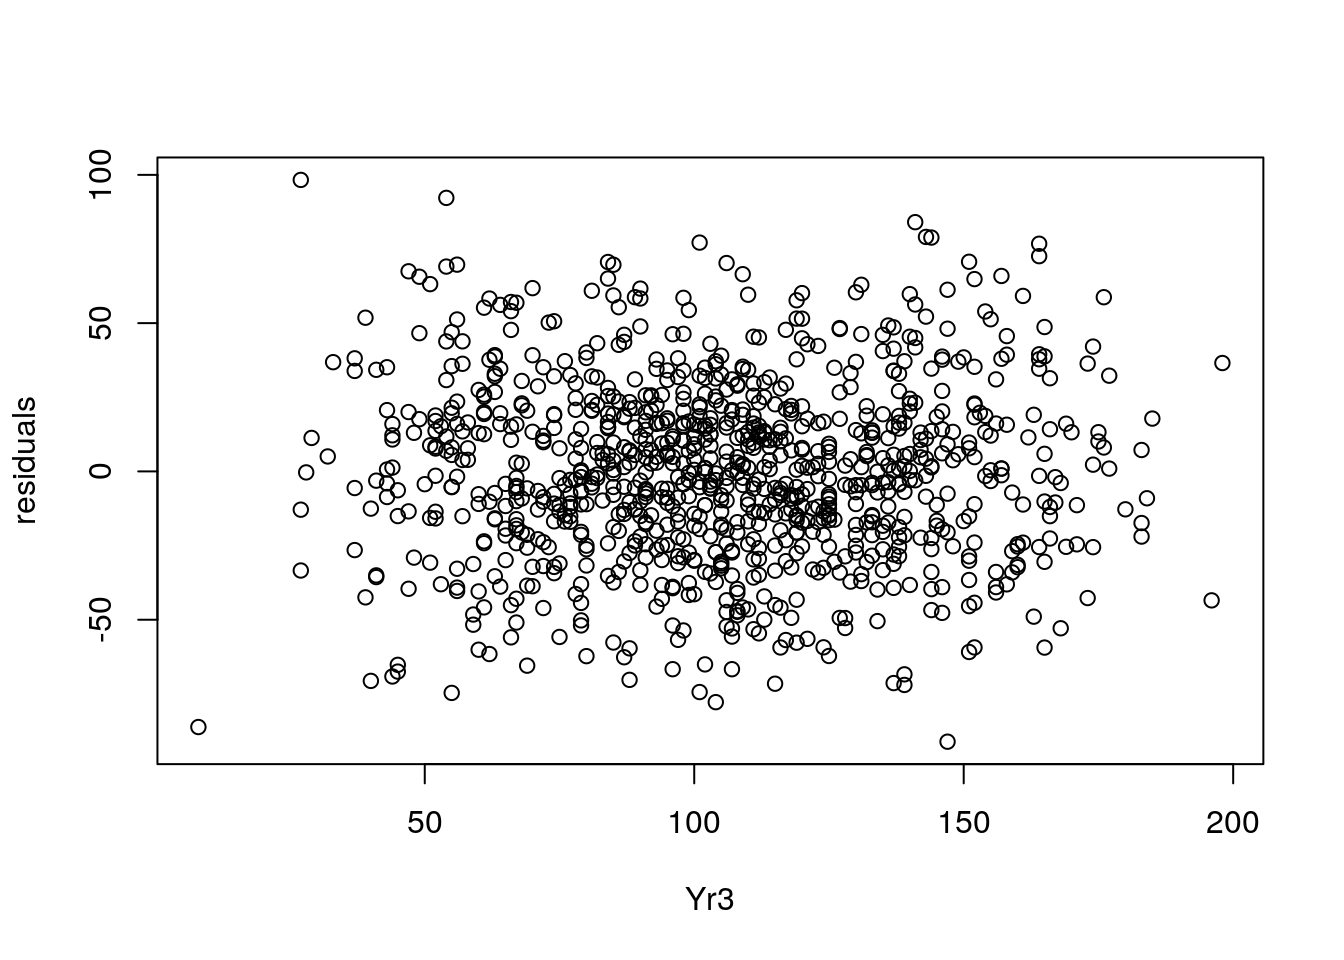 Plot of residuals against `Yr3` values